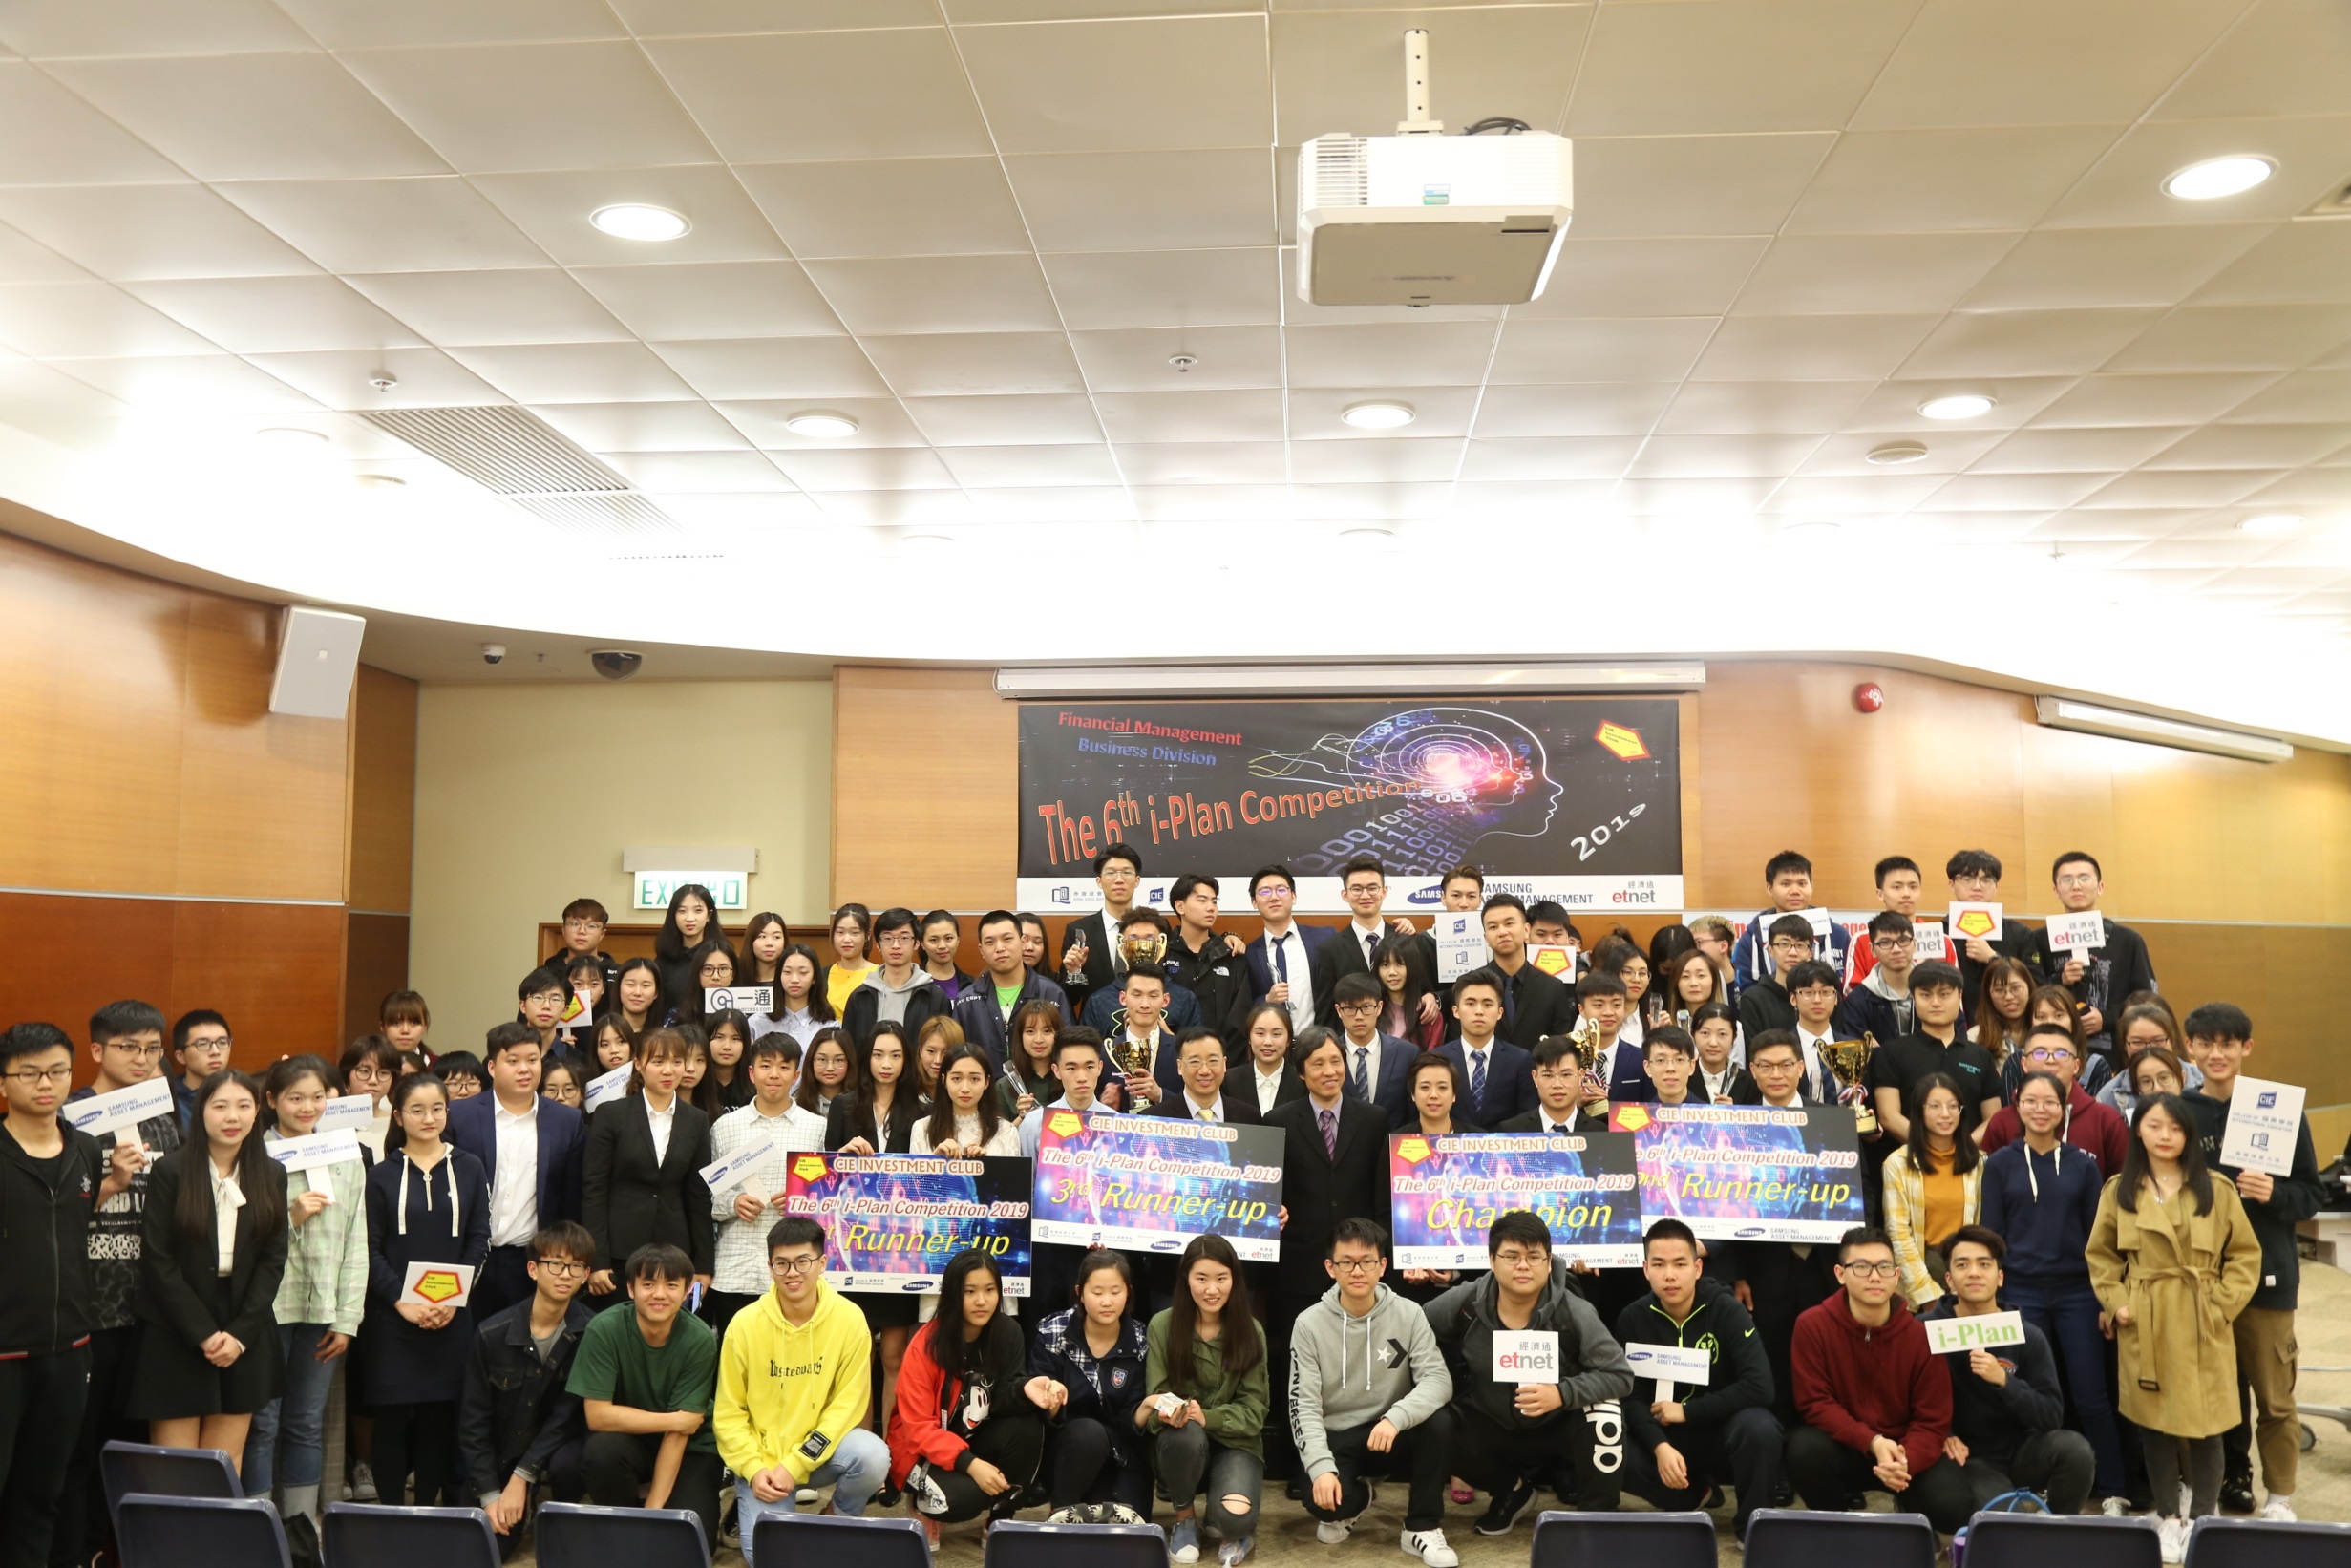 Over 140 participants joined the 6th I-Plan Competition Grand Final.